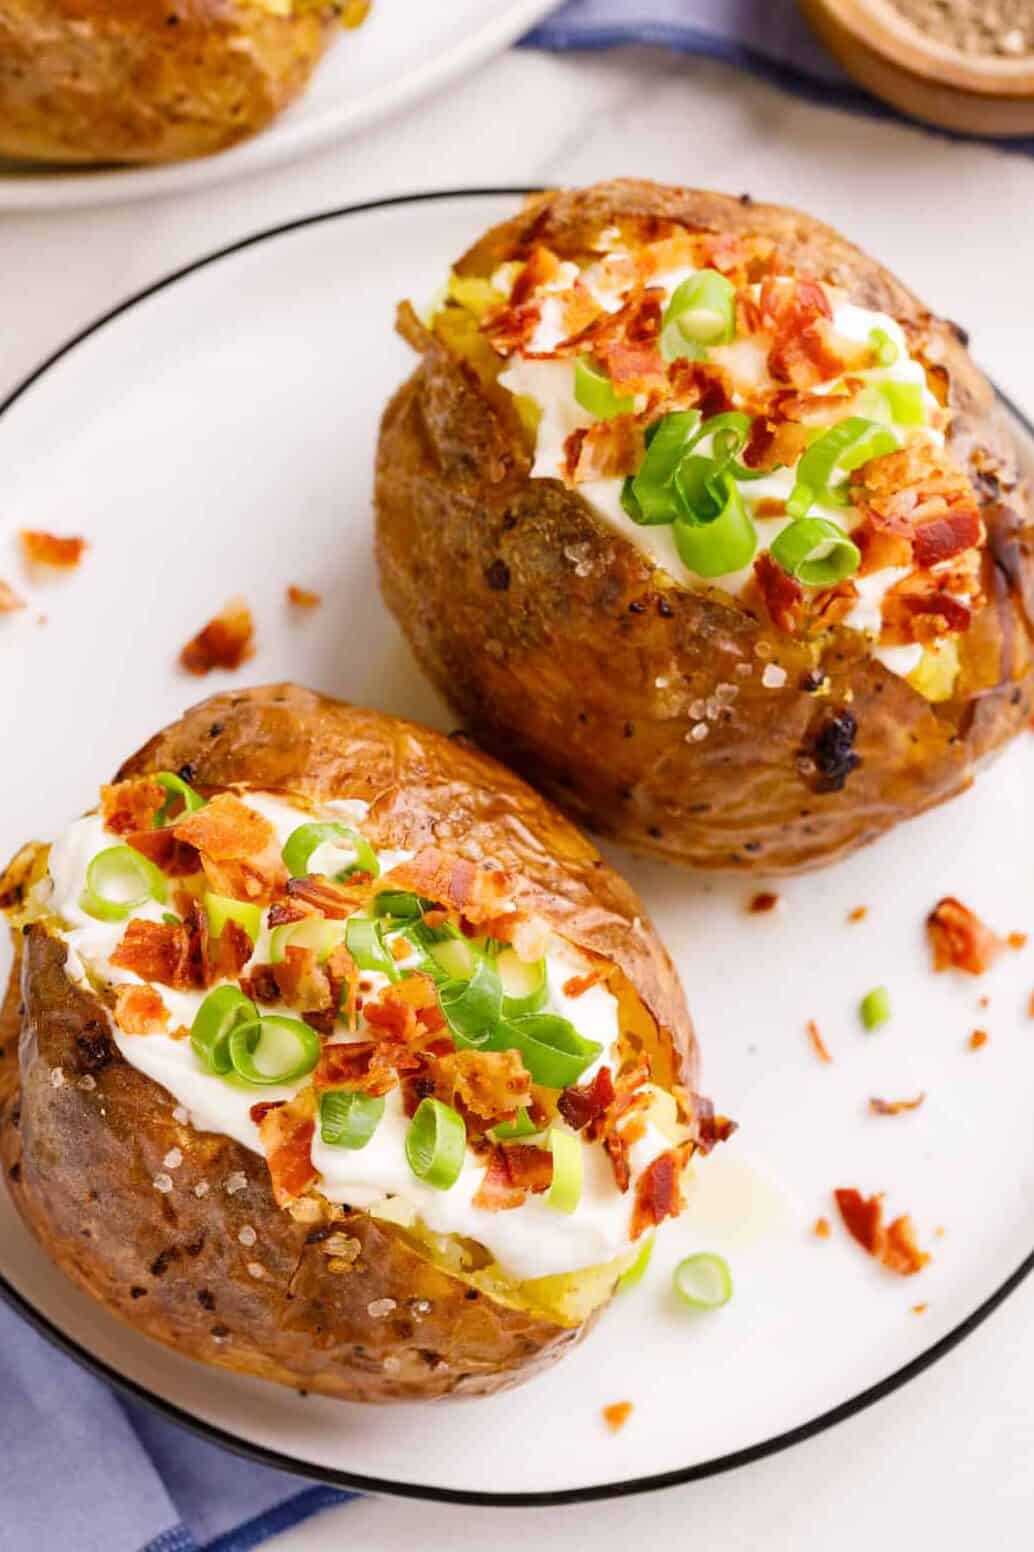 topo down image of two loaded baked potatoes served on a white round plate